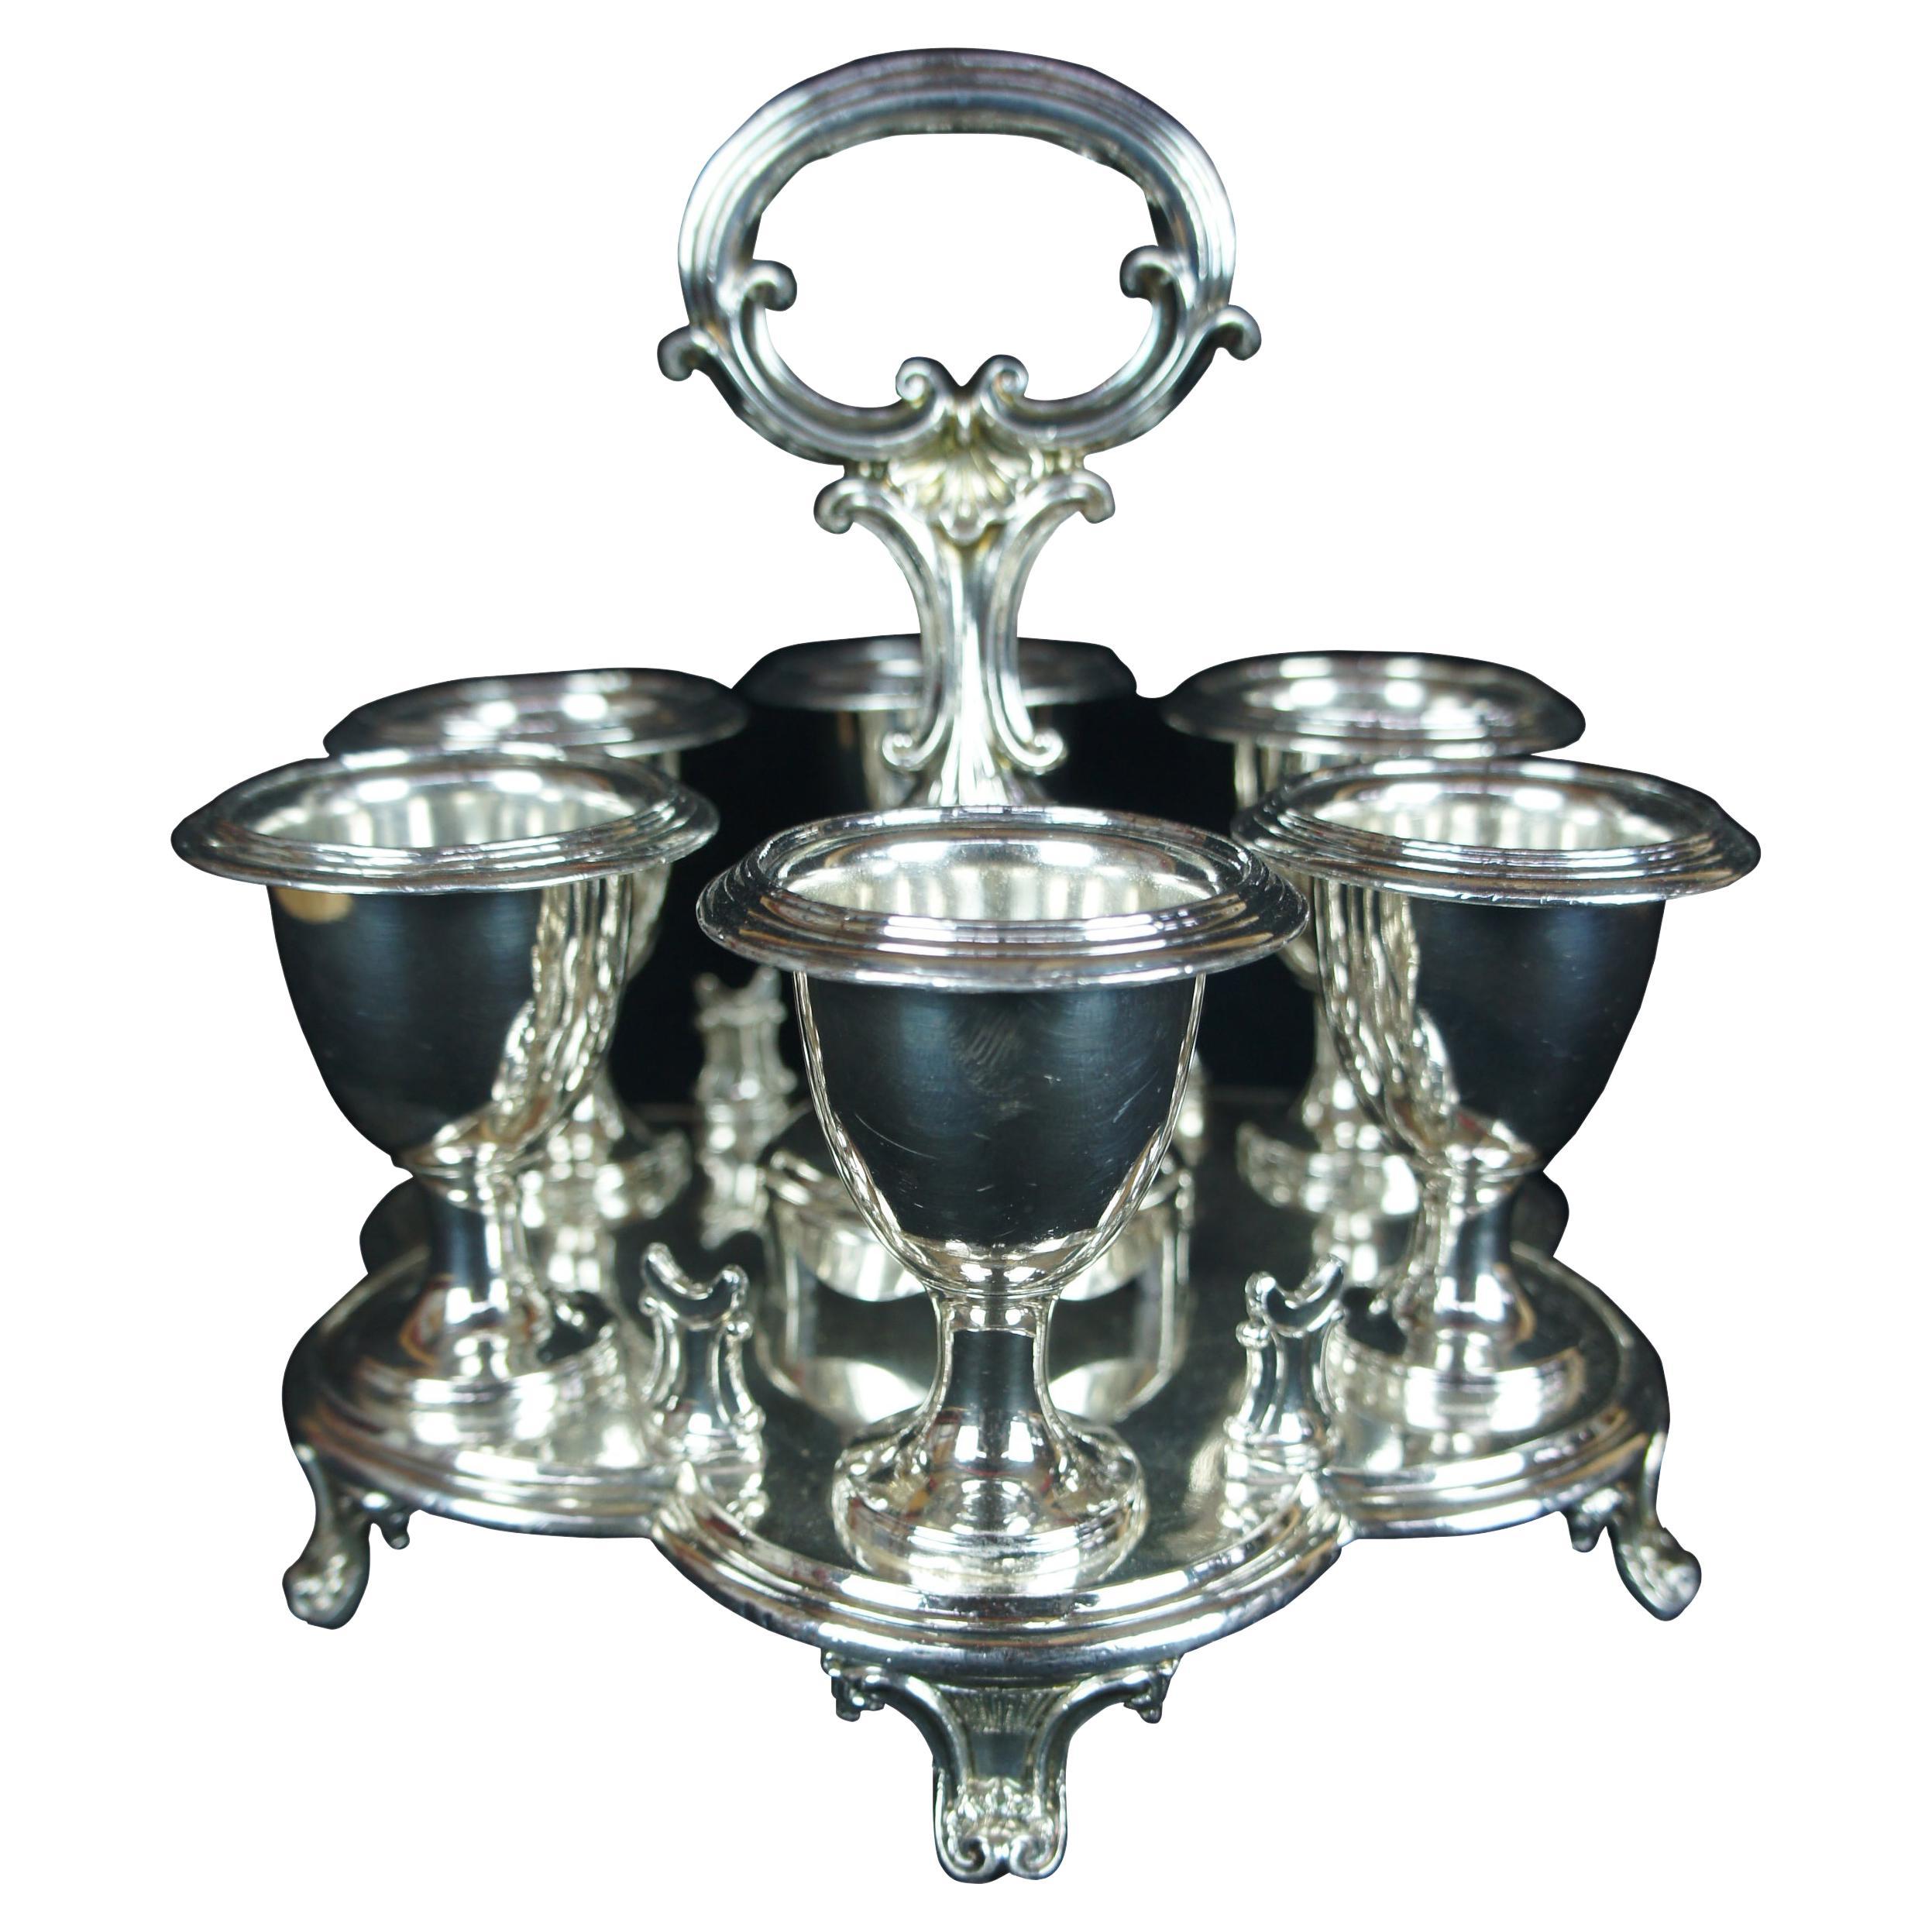 6 Baroque Silver Plated Kiddush Cup Goblets & Caddy Judaica Barware Shot Glasses For Sale